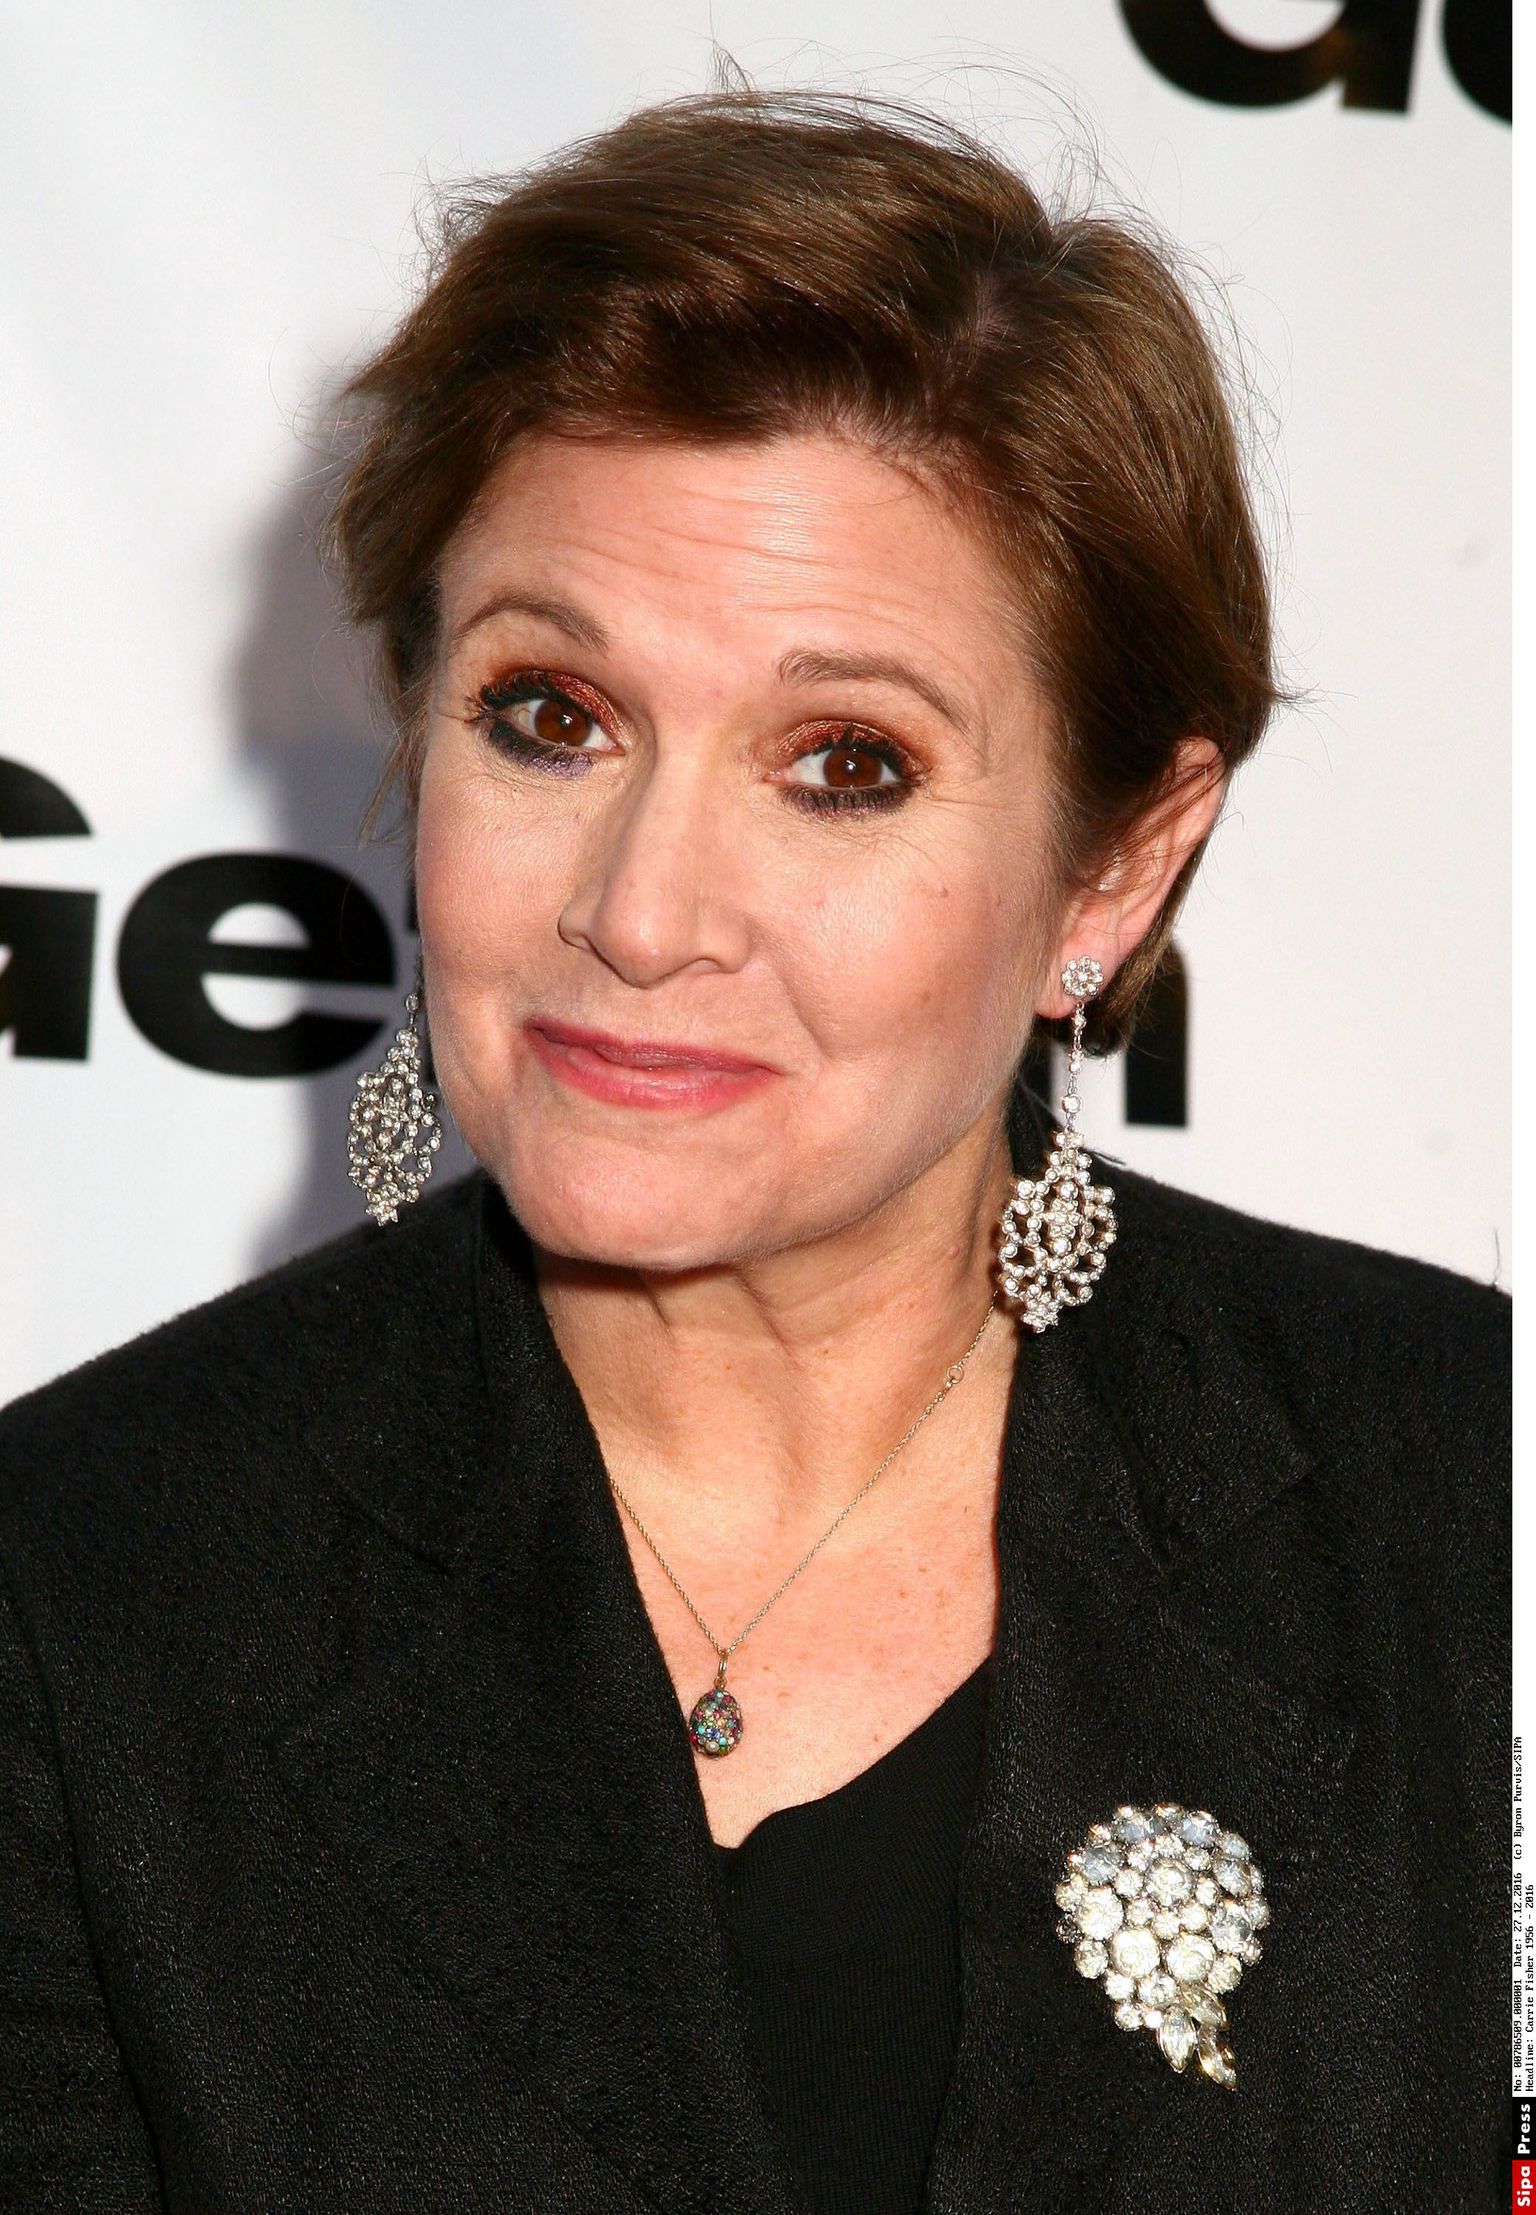 Carrie Fisher oli surres 60-aastane.